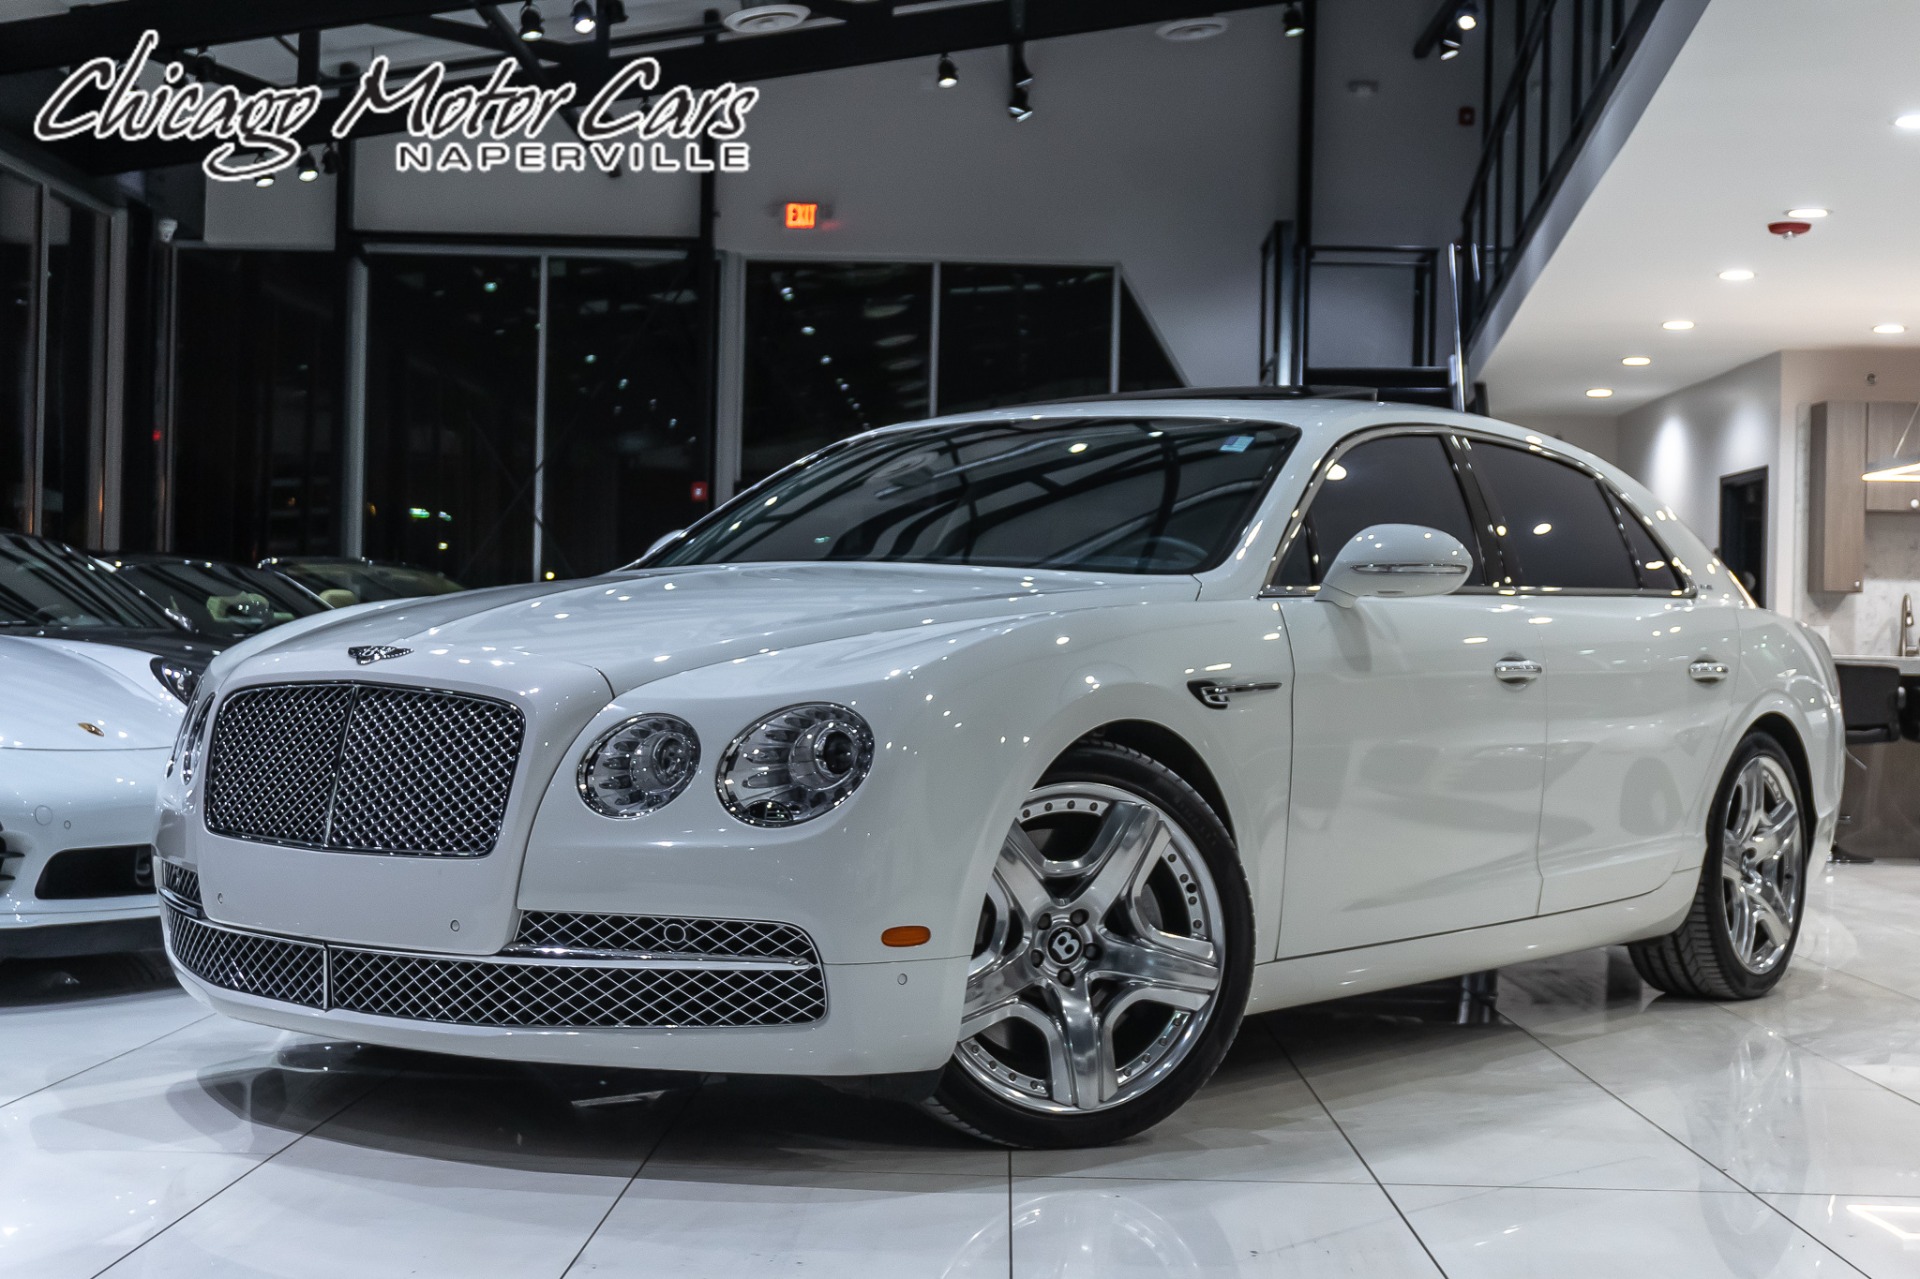 Used 2014 Bentley Flying Spur W12 Sedan LOADED Glacier White! For Sale  (Special Pricing) | Chicago Motor Cars Stock #16689A